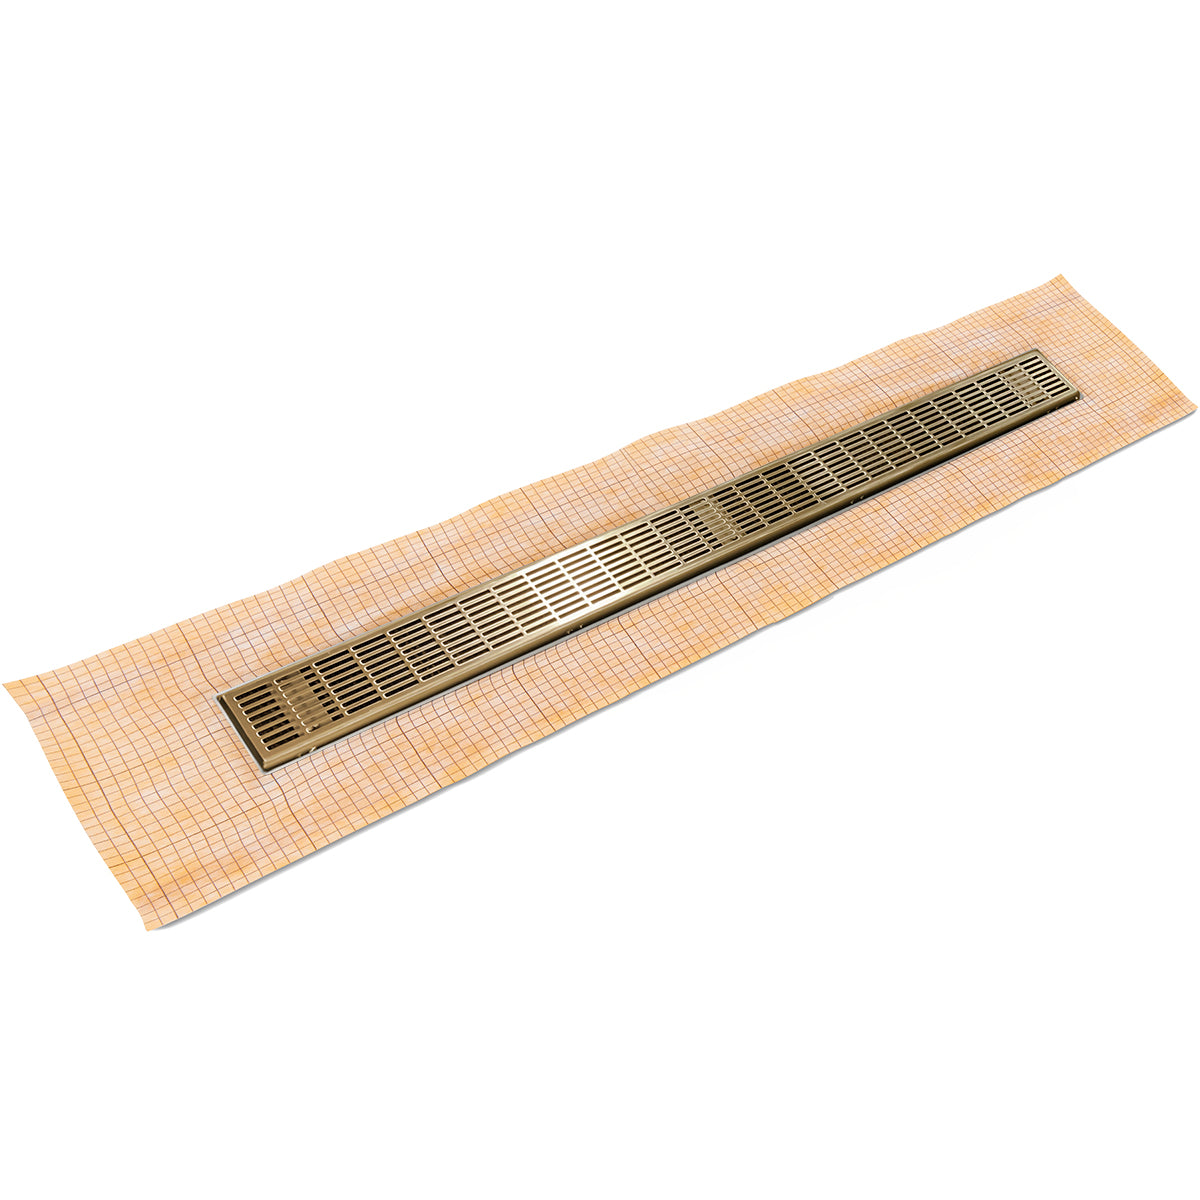 Infinity Drain 48" FCS Series Schluter-Kerdi - Fixed Flange Linear Drain Kit with 2 1/2" Perforated Slotted Grate